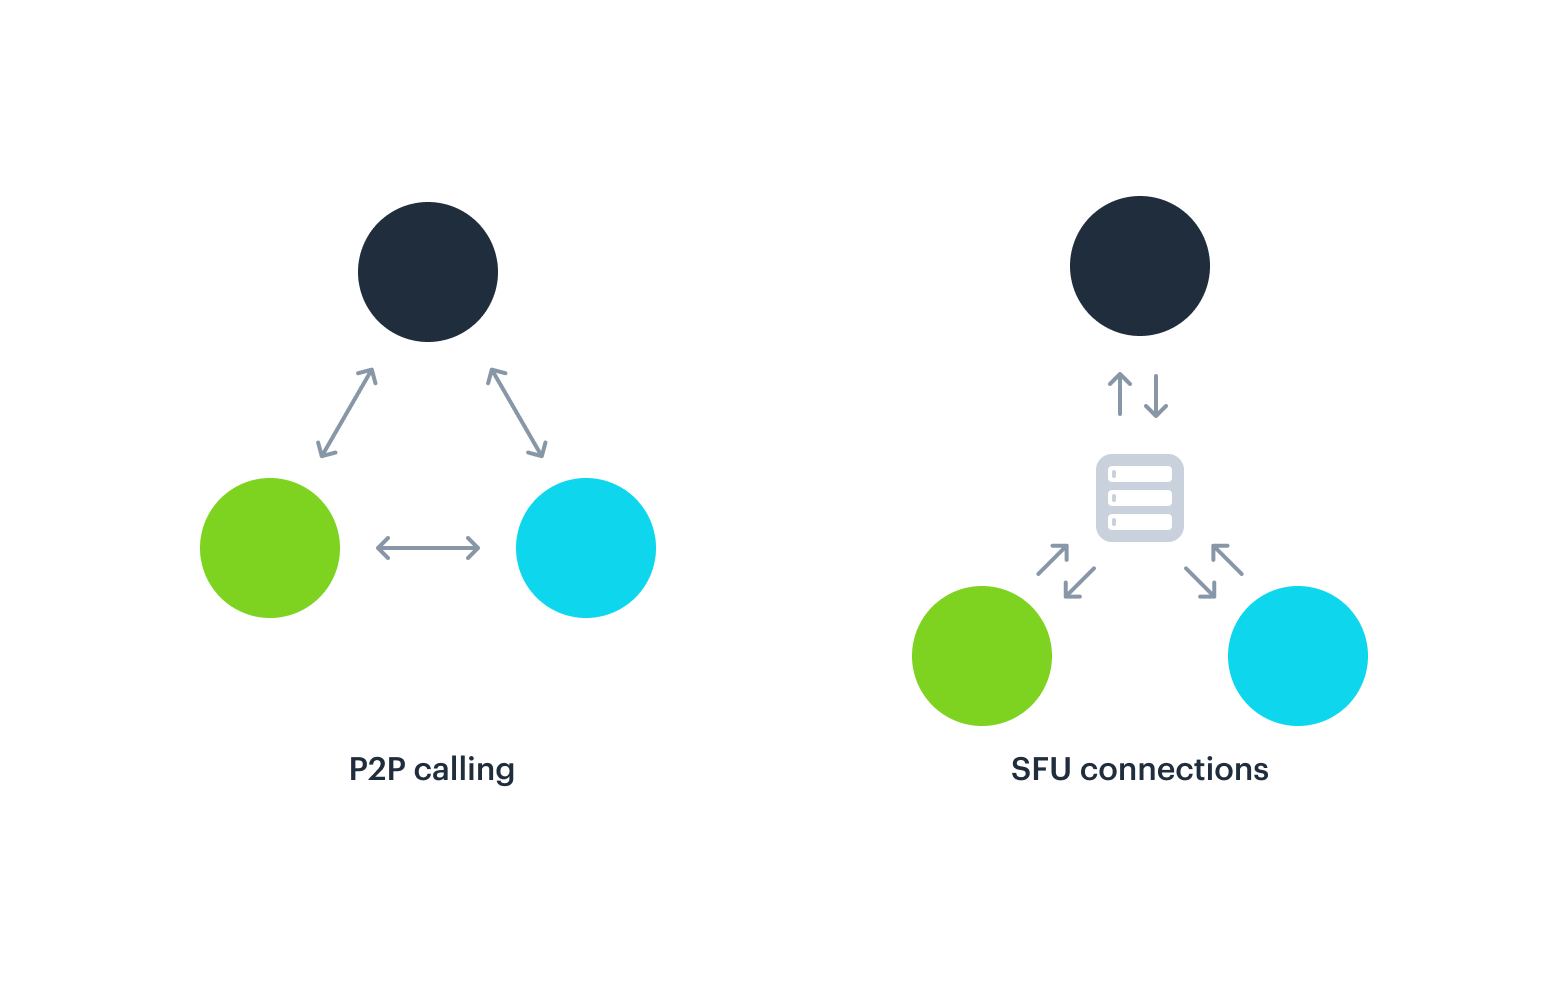 Abstract representation of P2P vs. SFU connections, where in P2P circles are connected by arrows and in SFU circles point arrows to a server icon